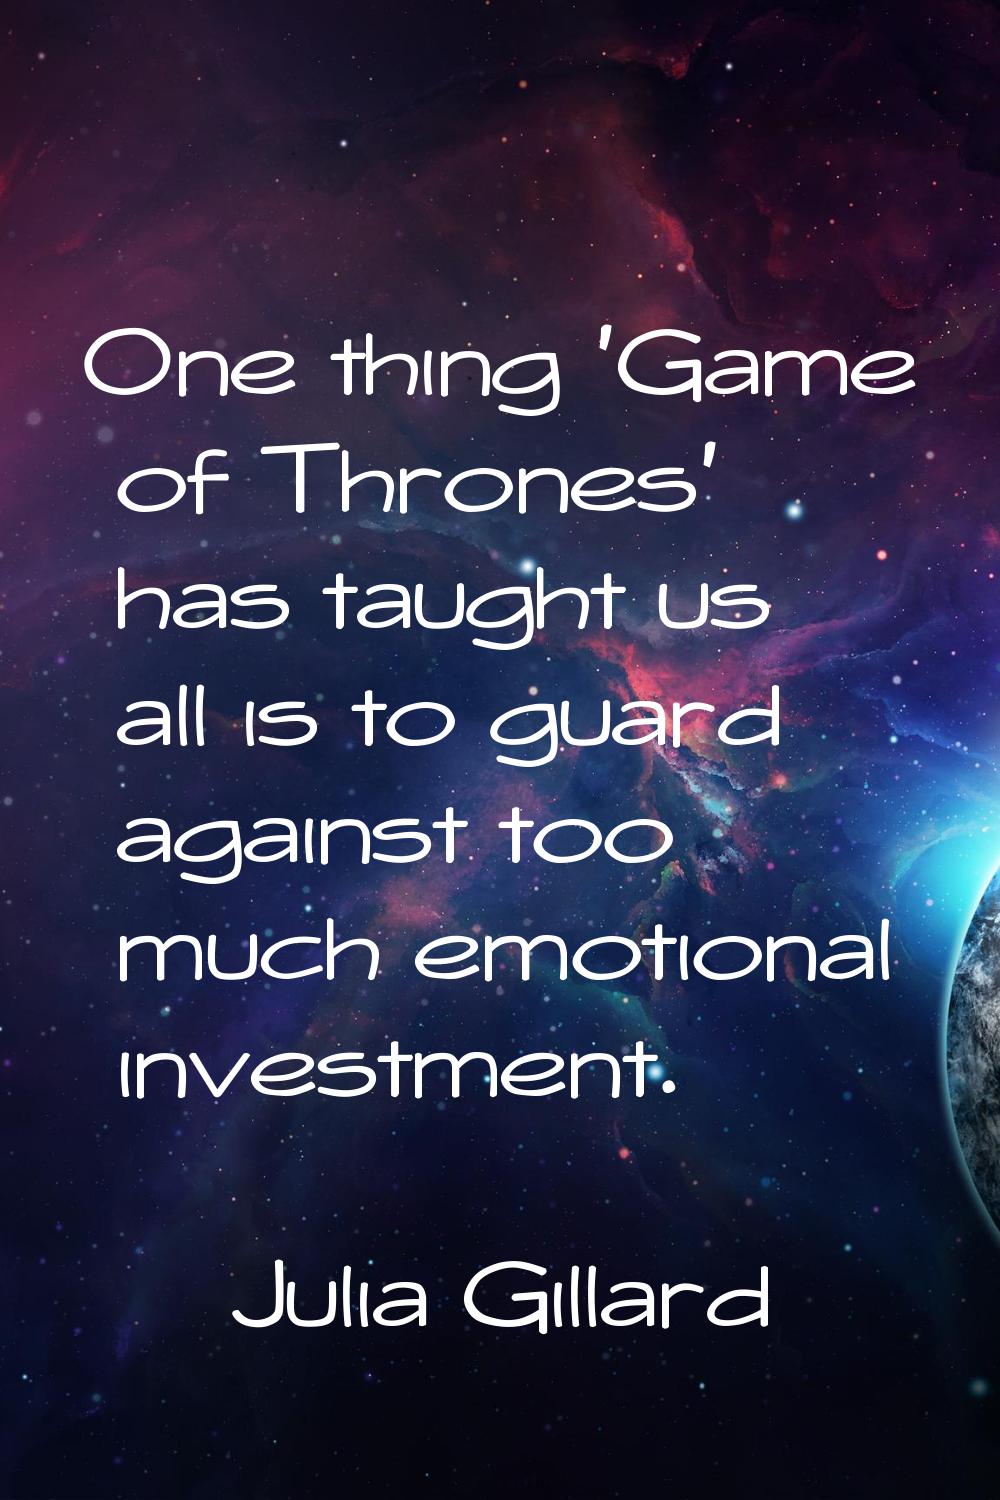 One thing 'Game of Thrones' has taught us all is to guard against too much emotional investment.